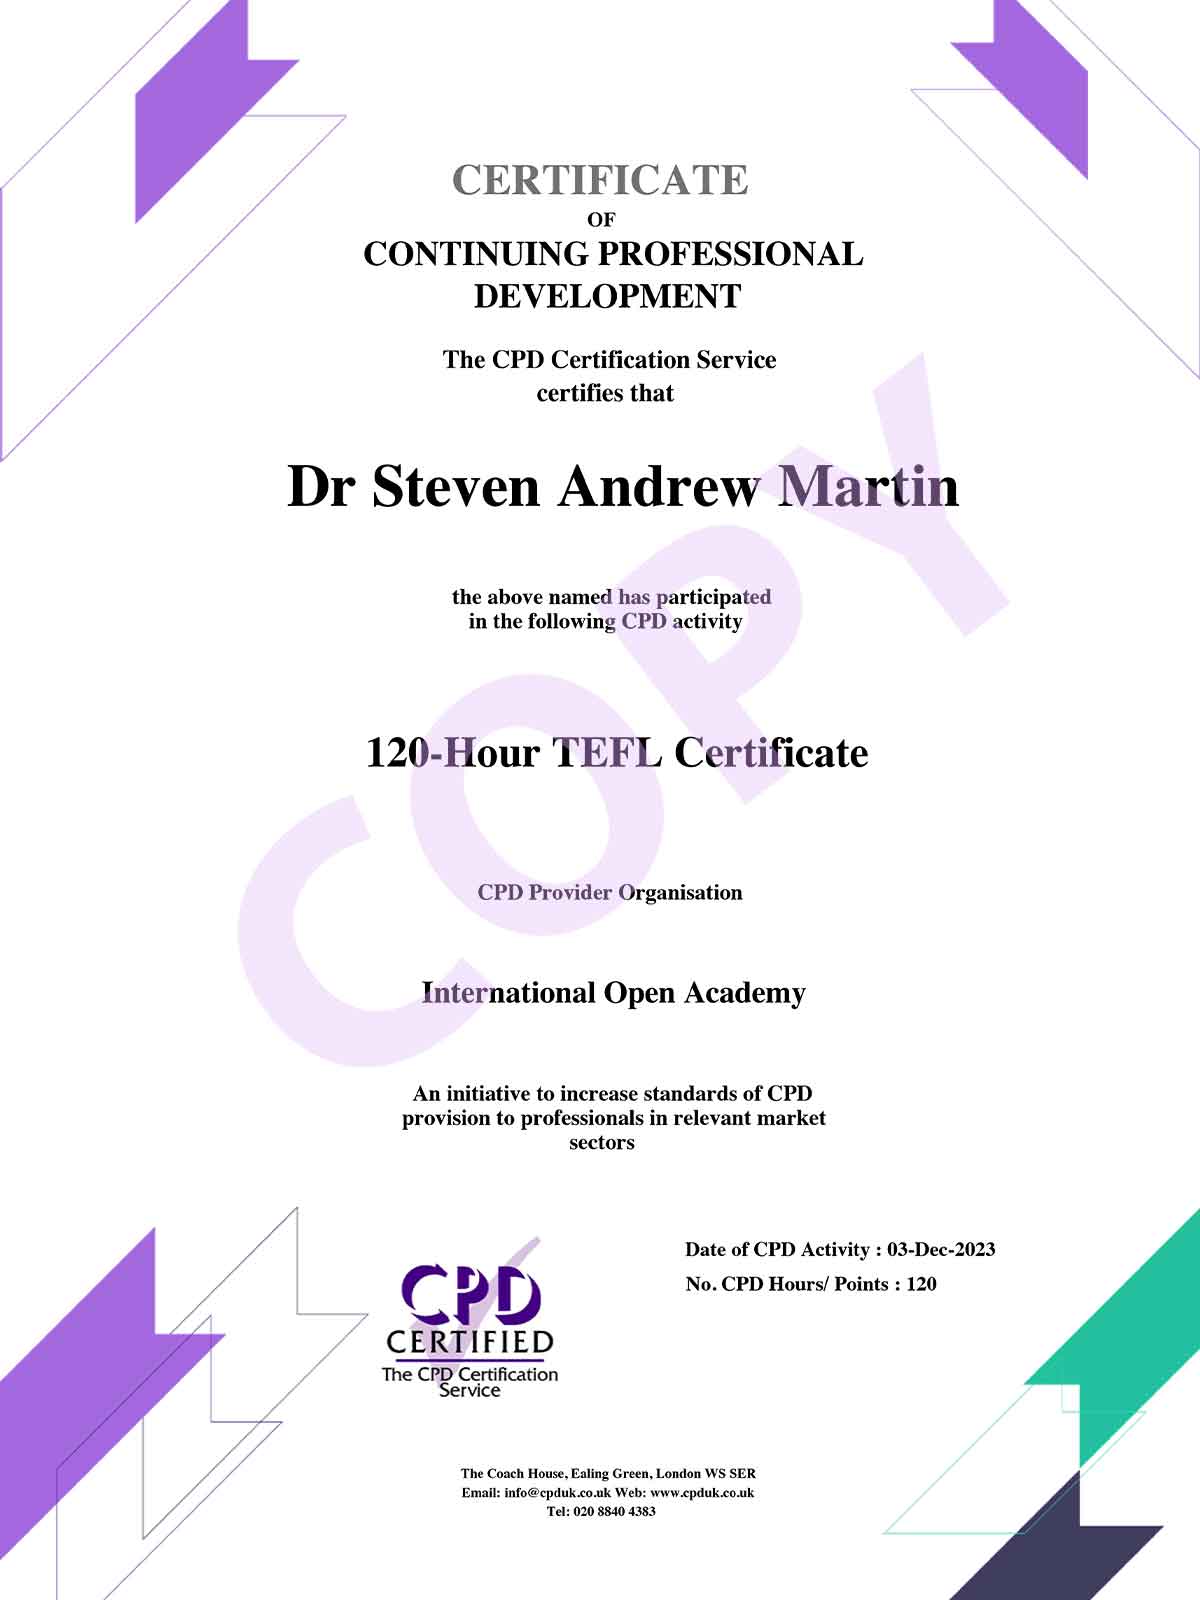 TEFL 120 Hour Certificate | Continuing Professional Development (CPD) | Dr Steven Andrew Martin | Teaching English as a Foreign Language